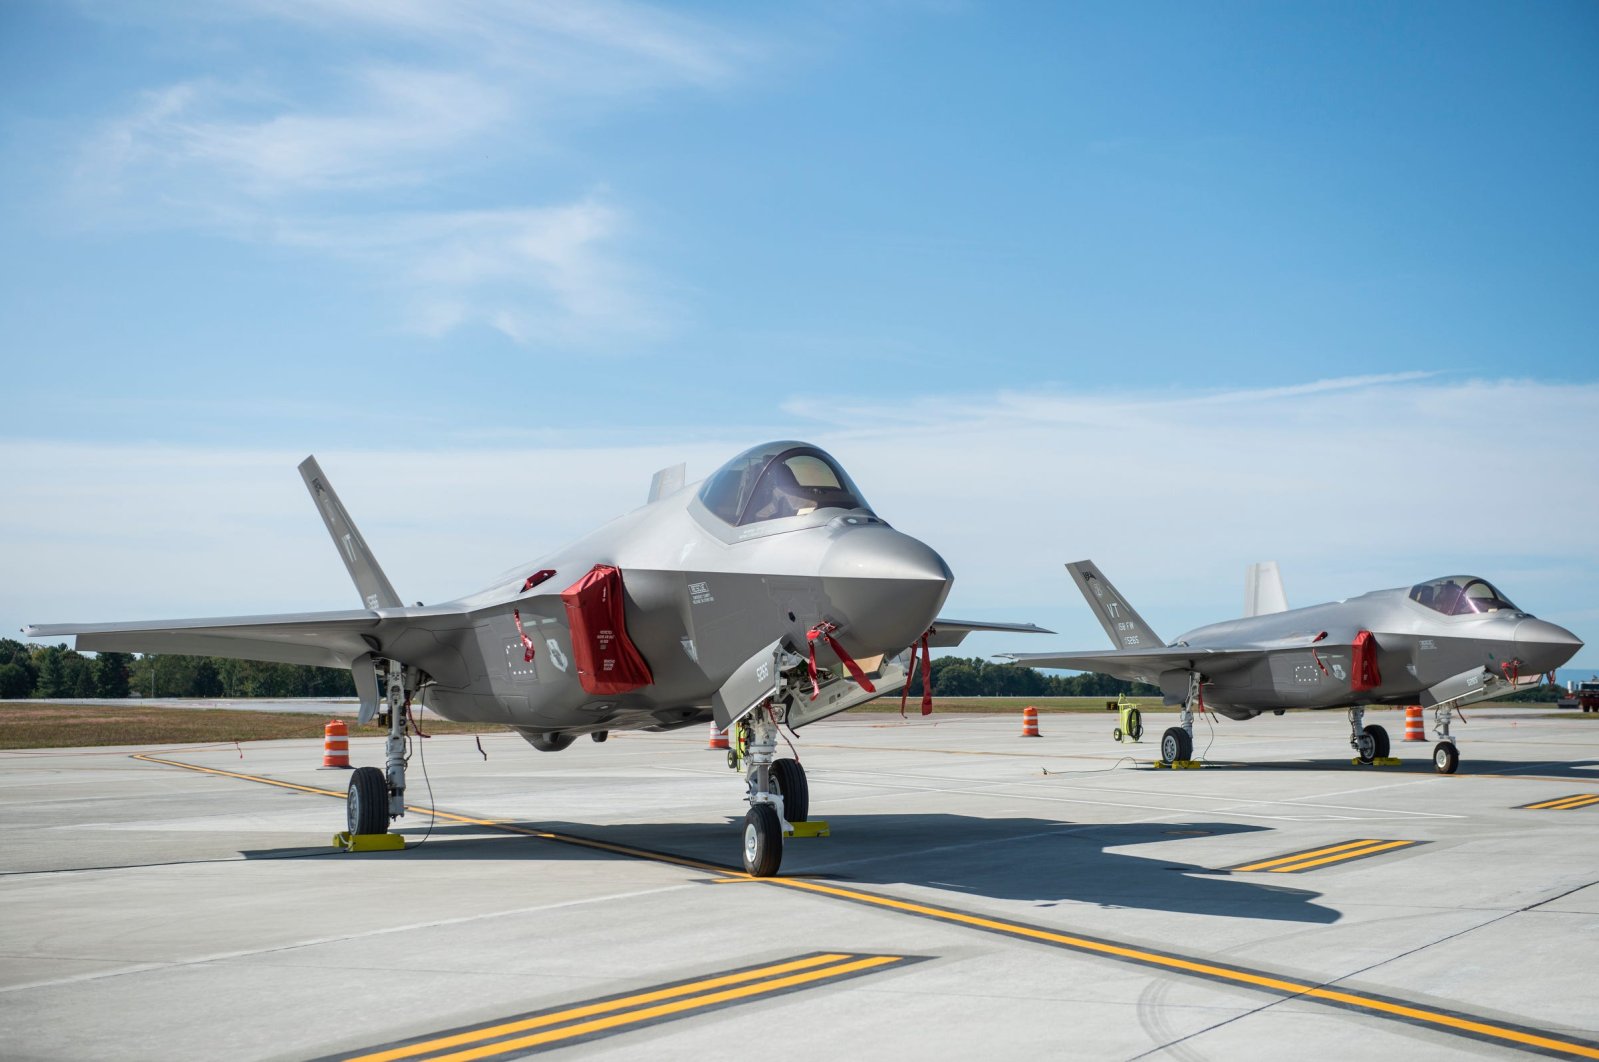 The F-35 jets sit side-by-side on the runway at the Burlington International Airport, Vermont, U.S., Sept. 19, 2019. (Reuters Photo)